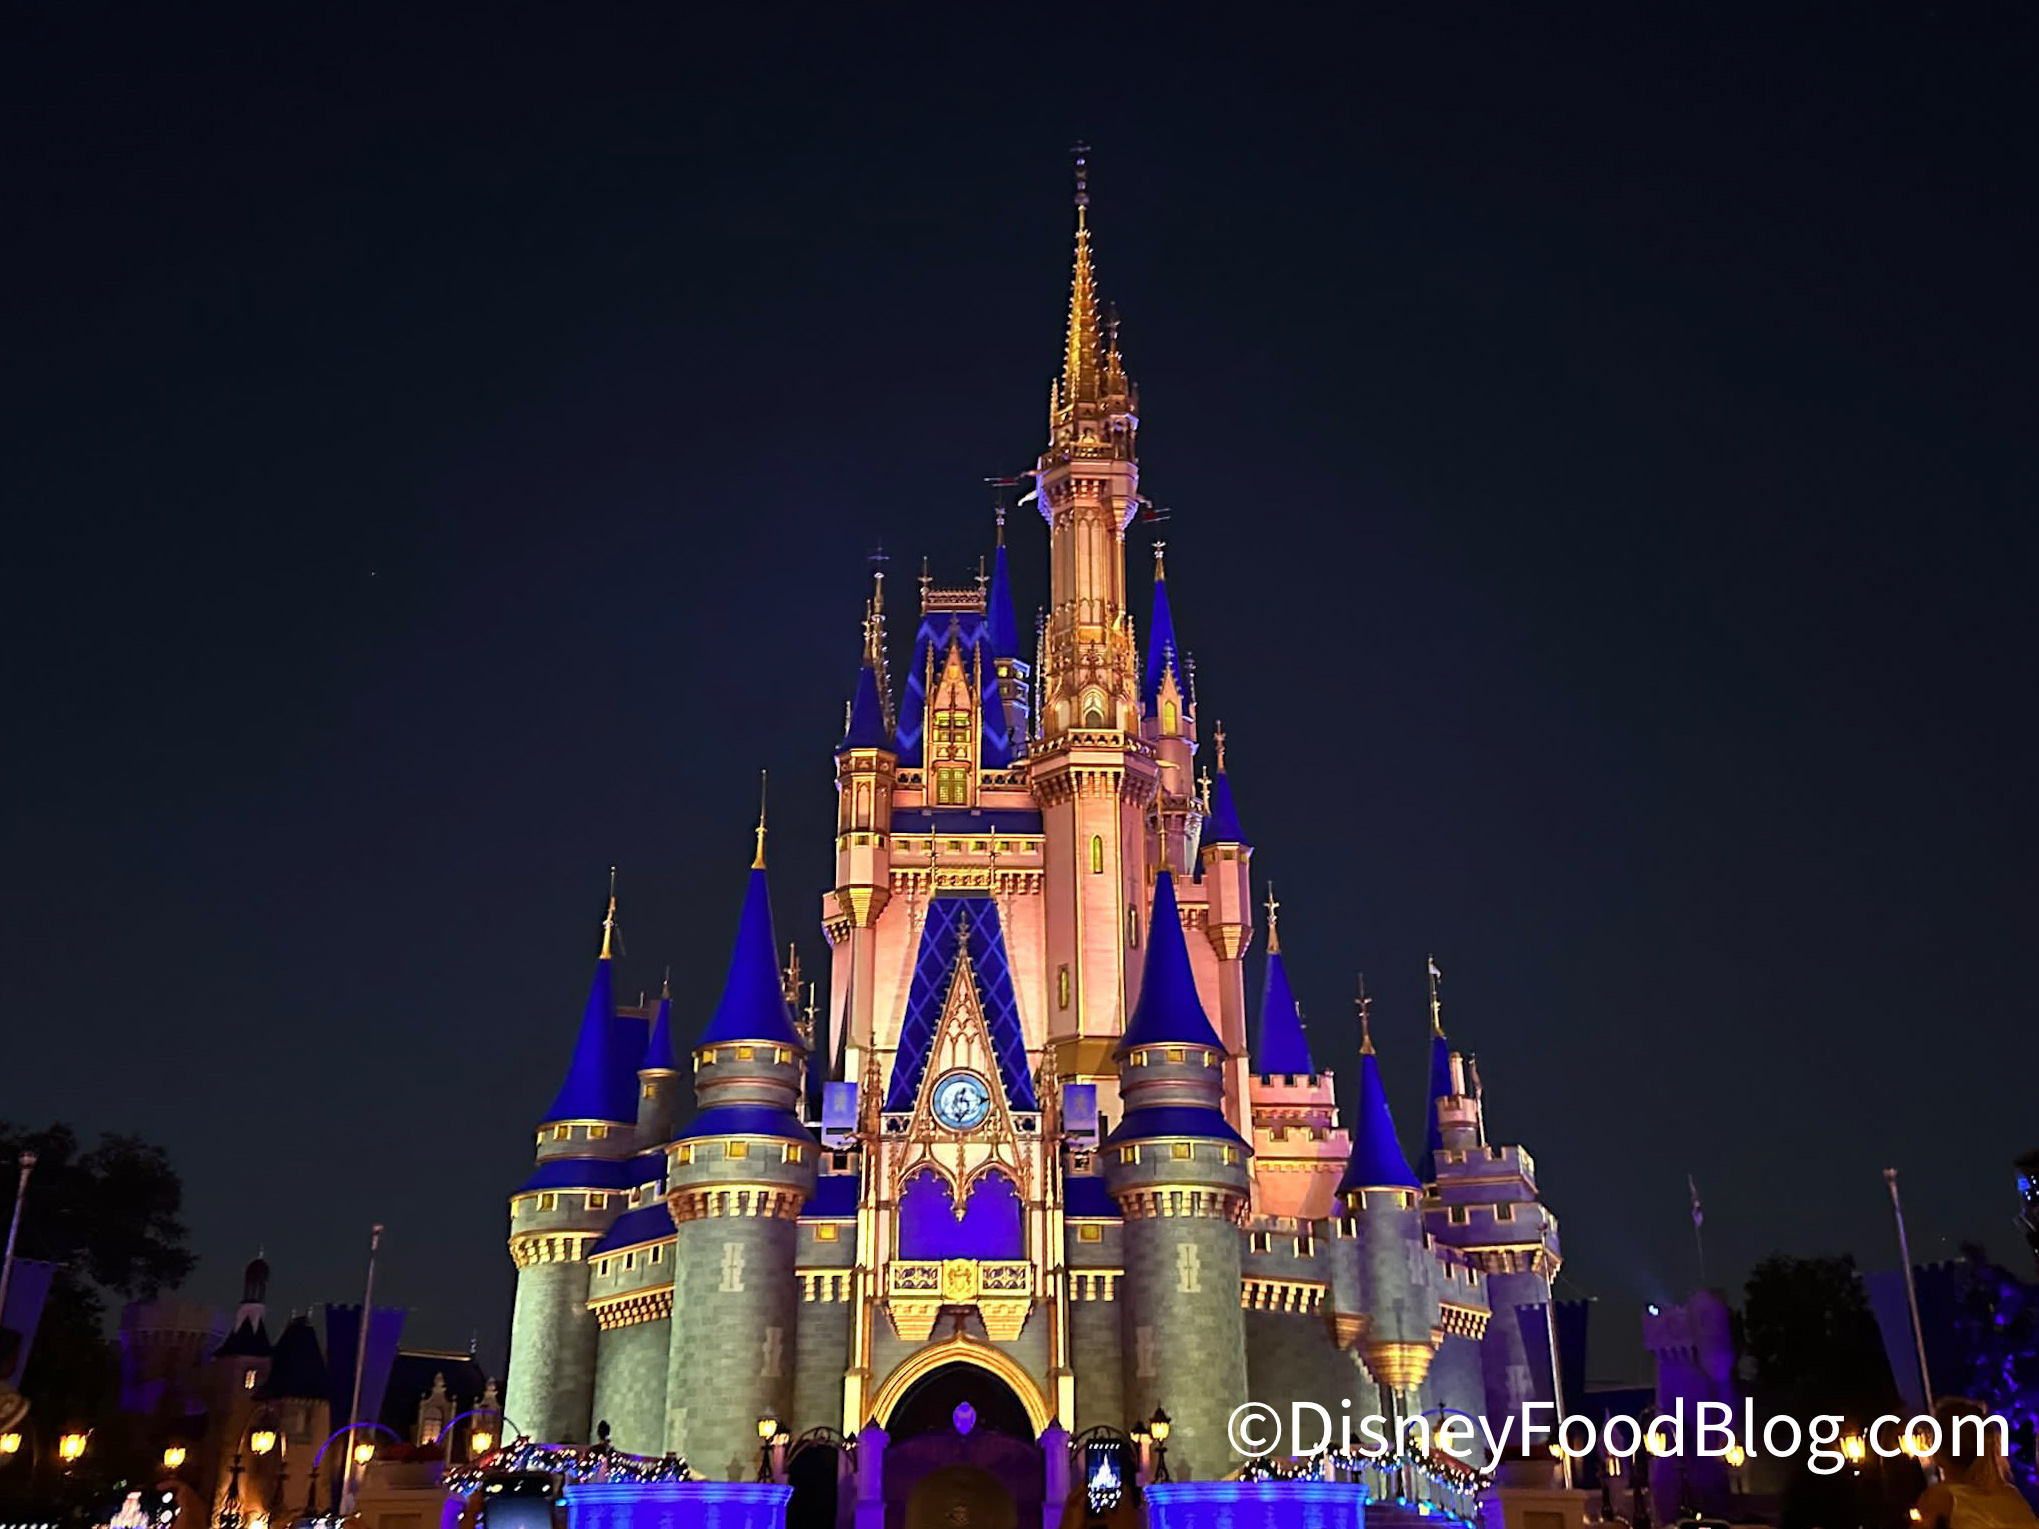 Walt Disney World Theme Park Reservations Replenished for Mid-June and July  - WDW News Today